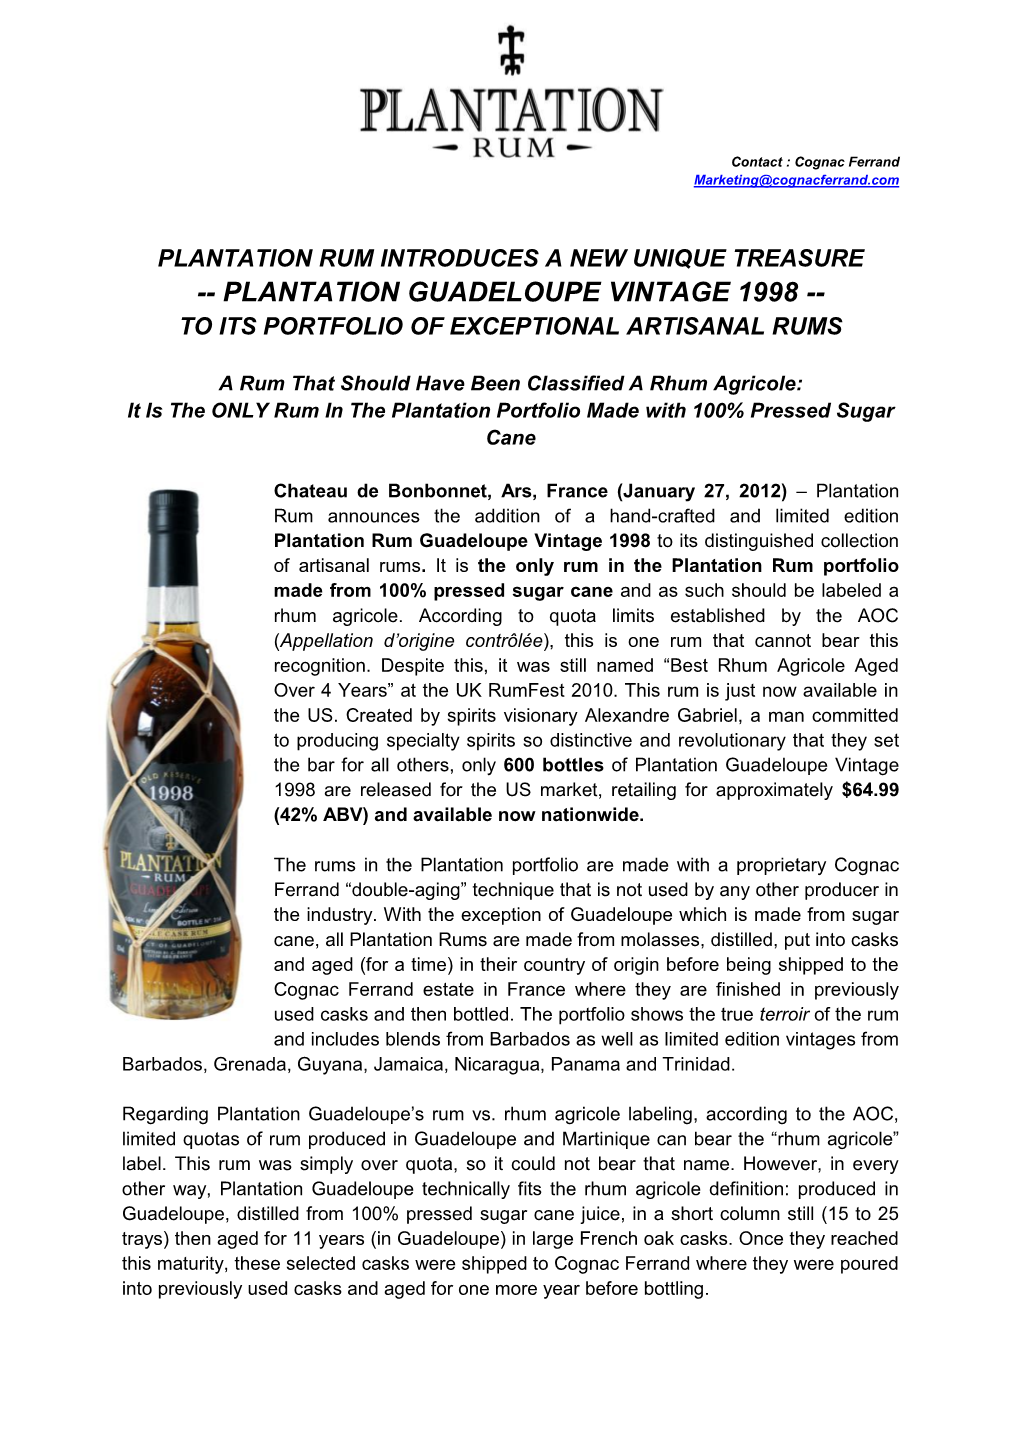 Plantation Guadeloupe Vintage 1998 -- to Its Portfolio of Exceptional Artisanal Rums